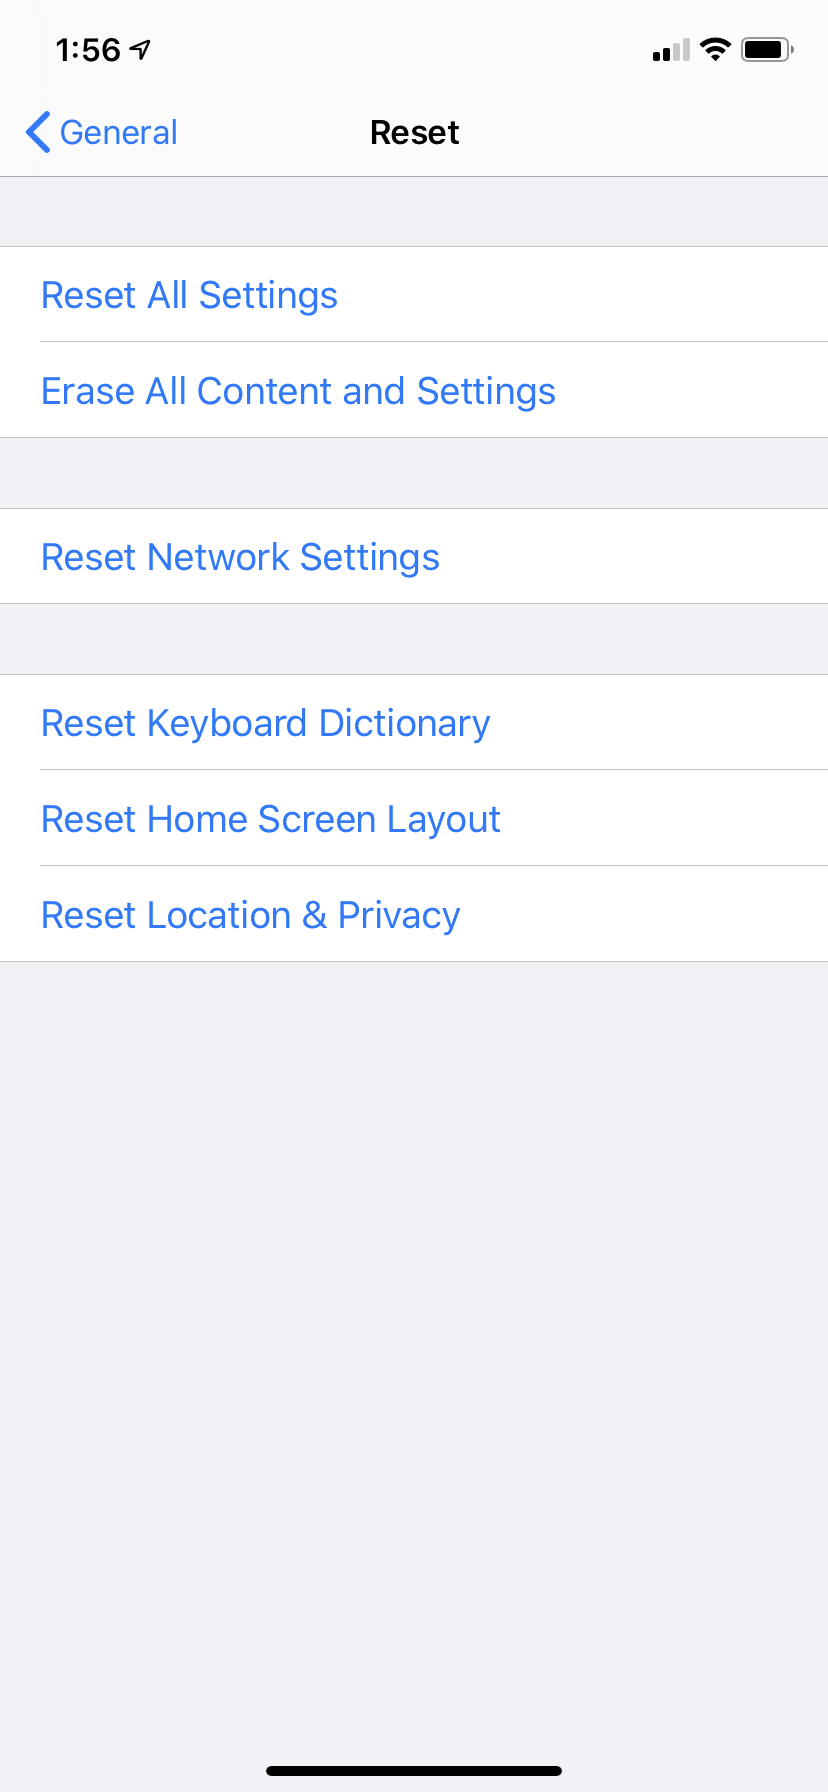 Look for Reset Network Settings